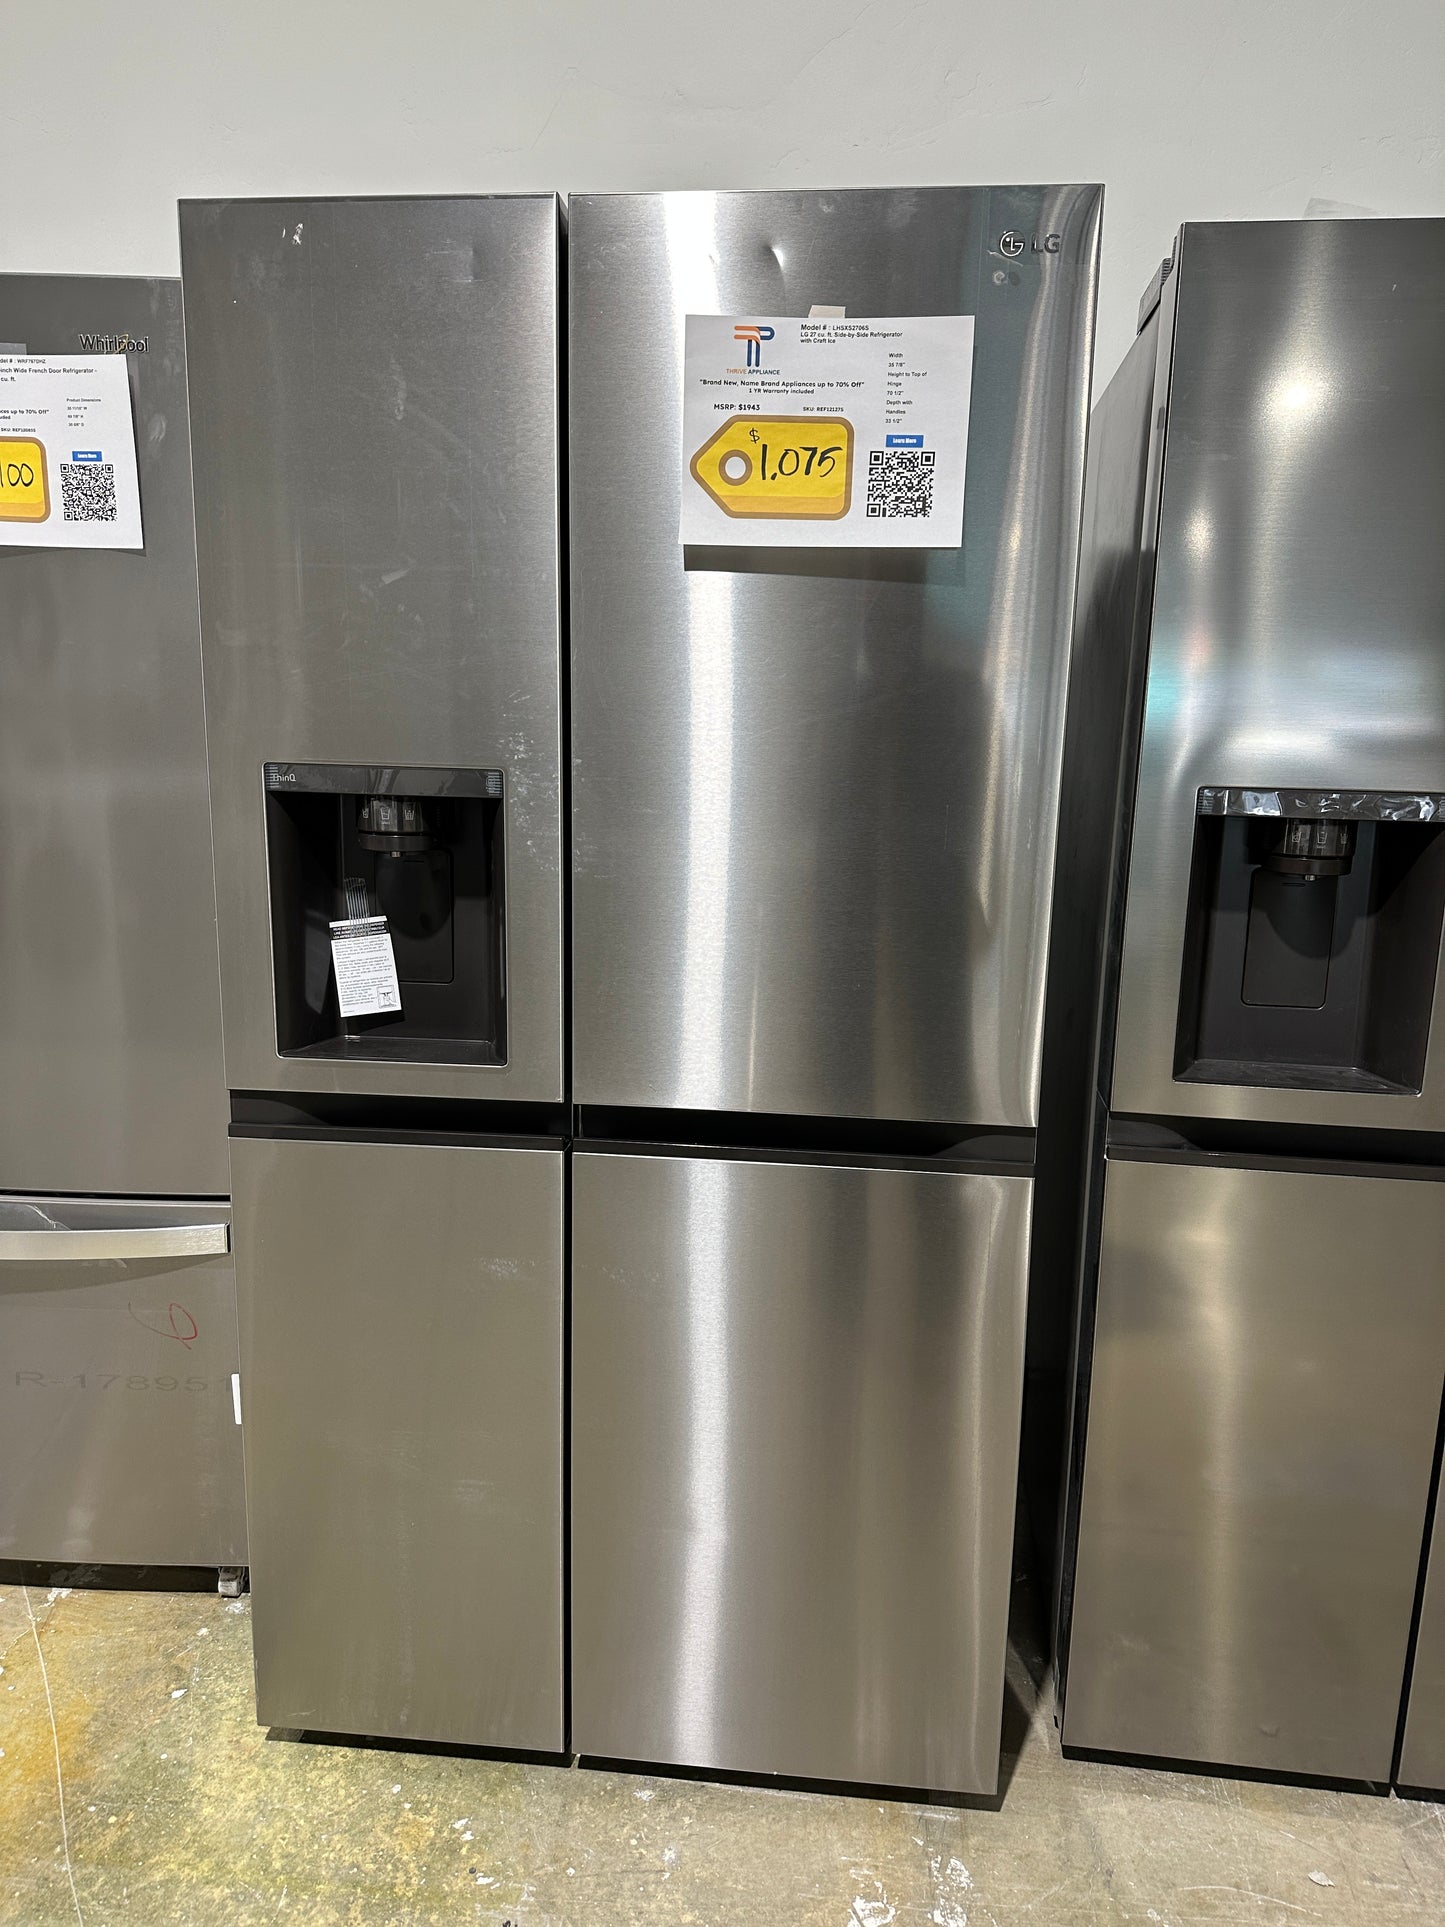 LG - 27.2 Cu. Ft. Side-by-Side Refrigerator with SpacePlus Ice - Model:LRSXS2706S  REF12127S